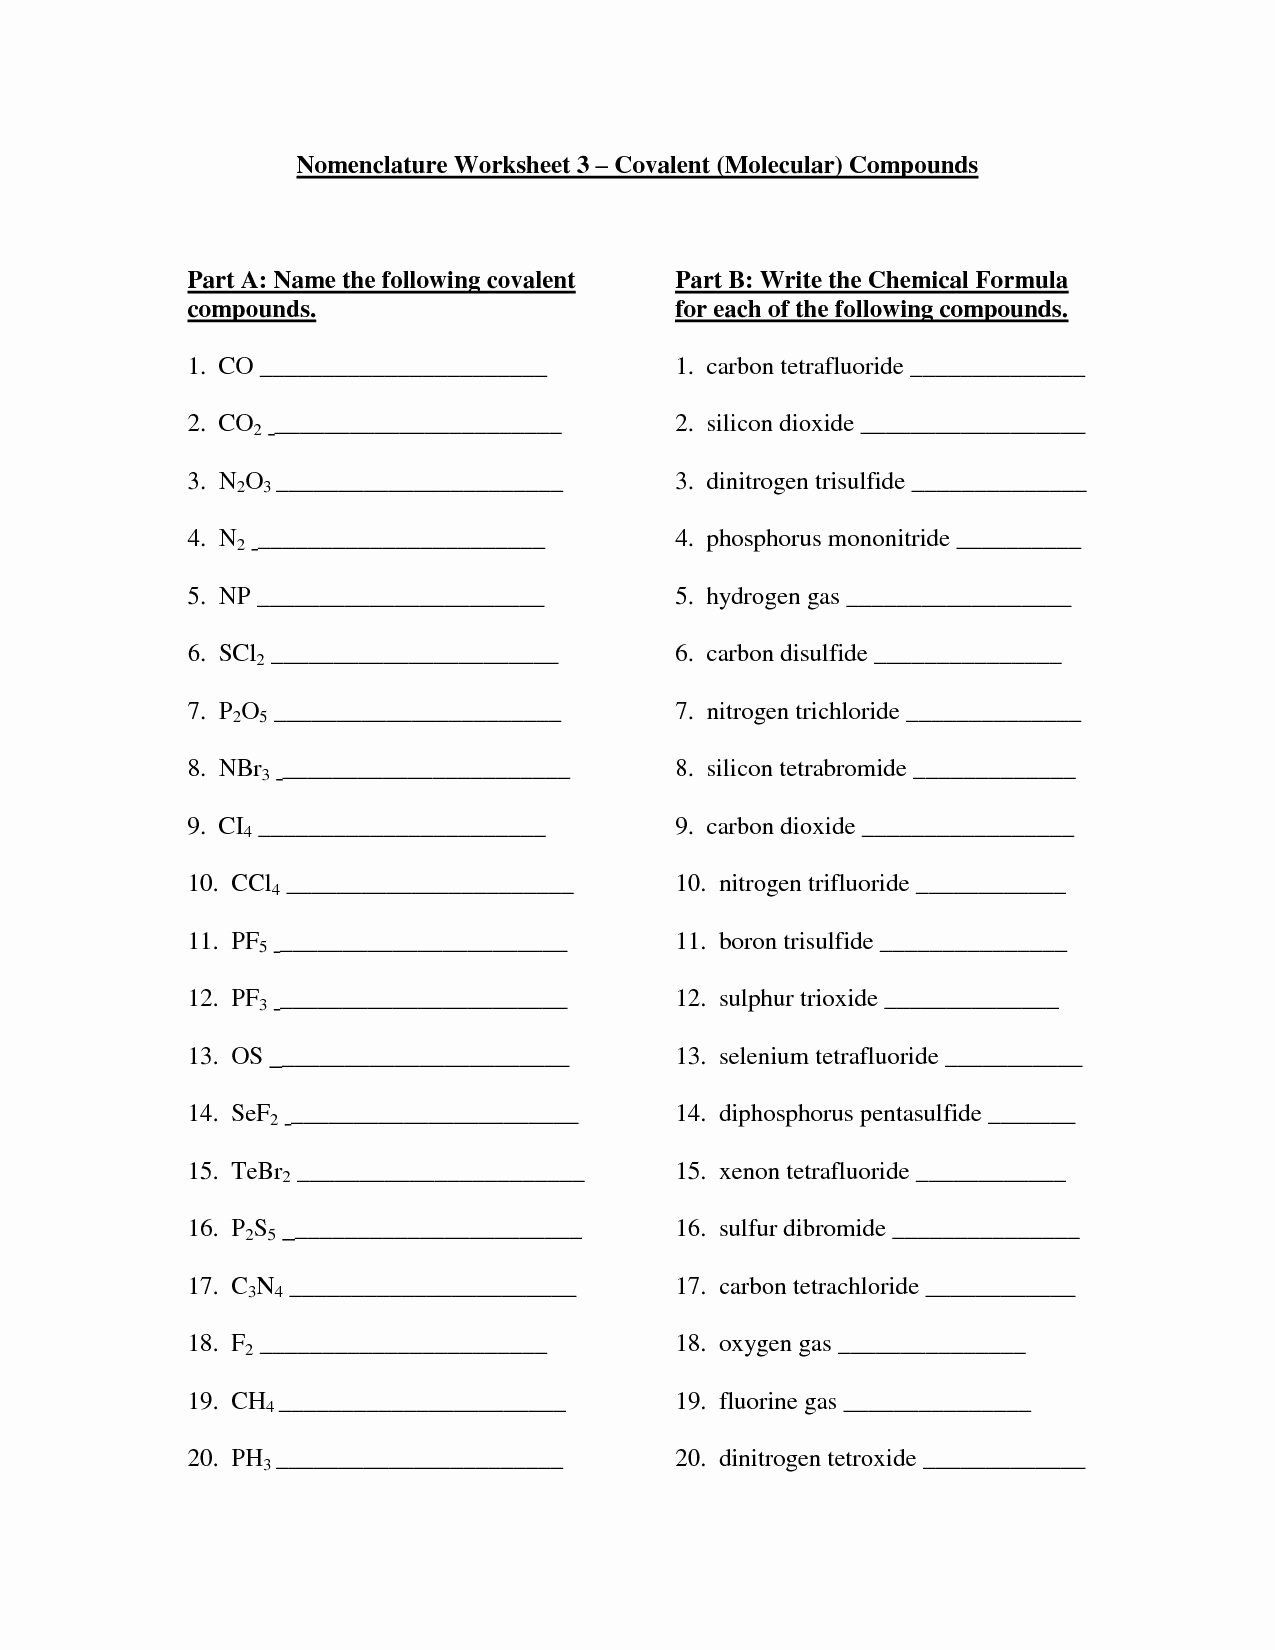 Chemical Bonding Worksheet Answers 50 Covalent Bonding Worksheet Answer Key In 2020